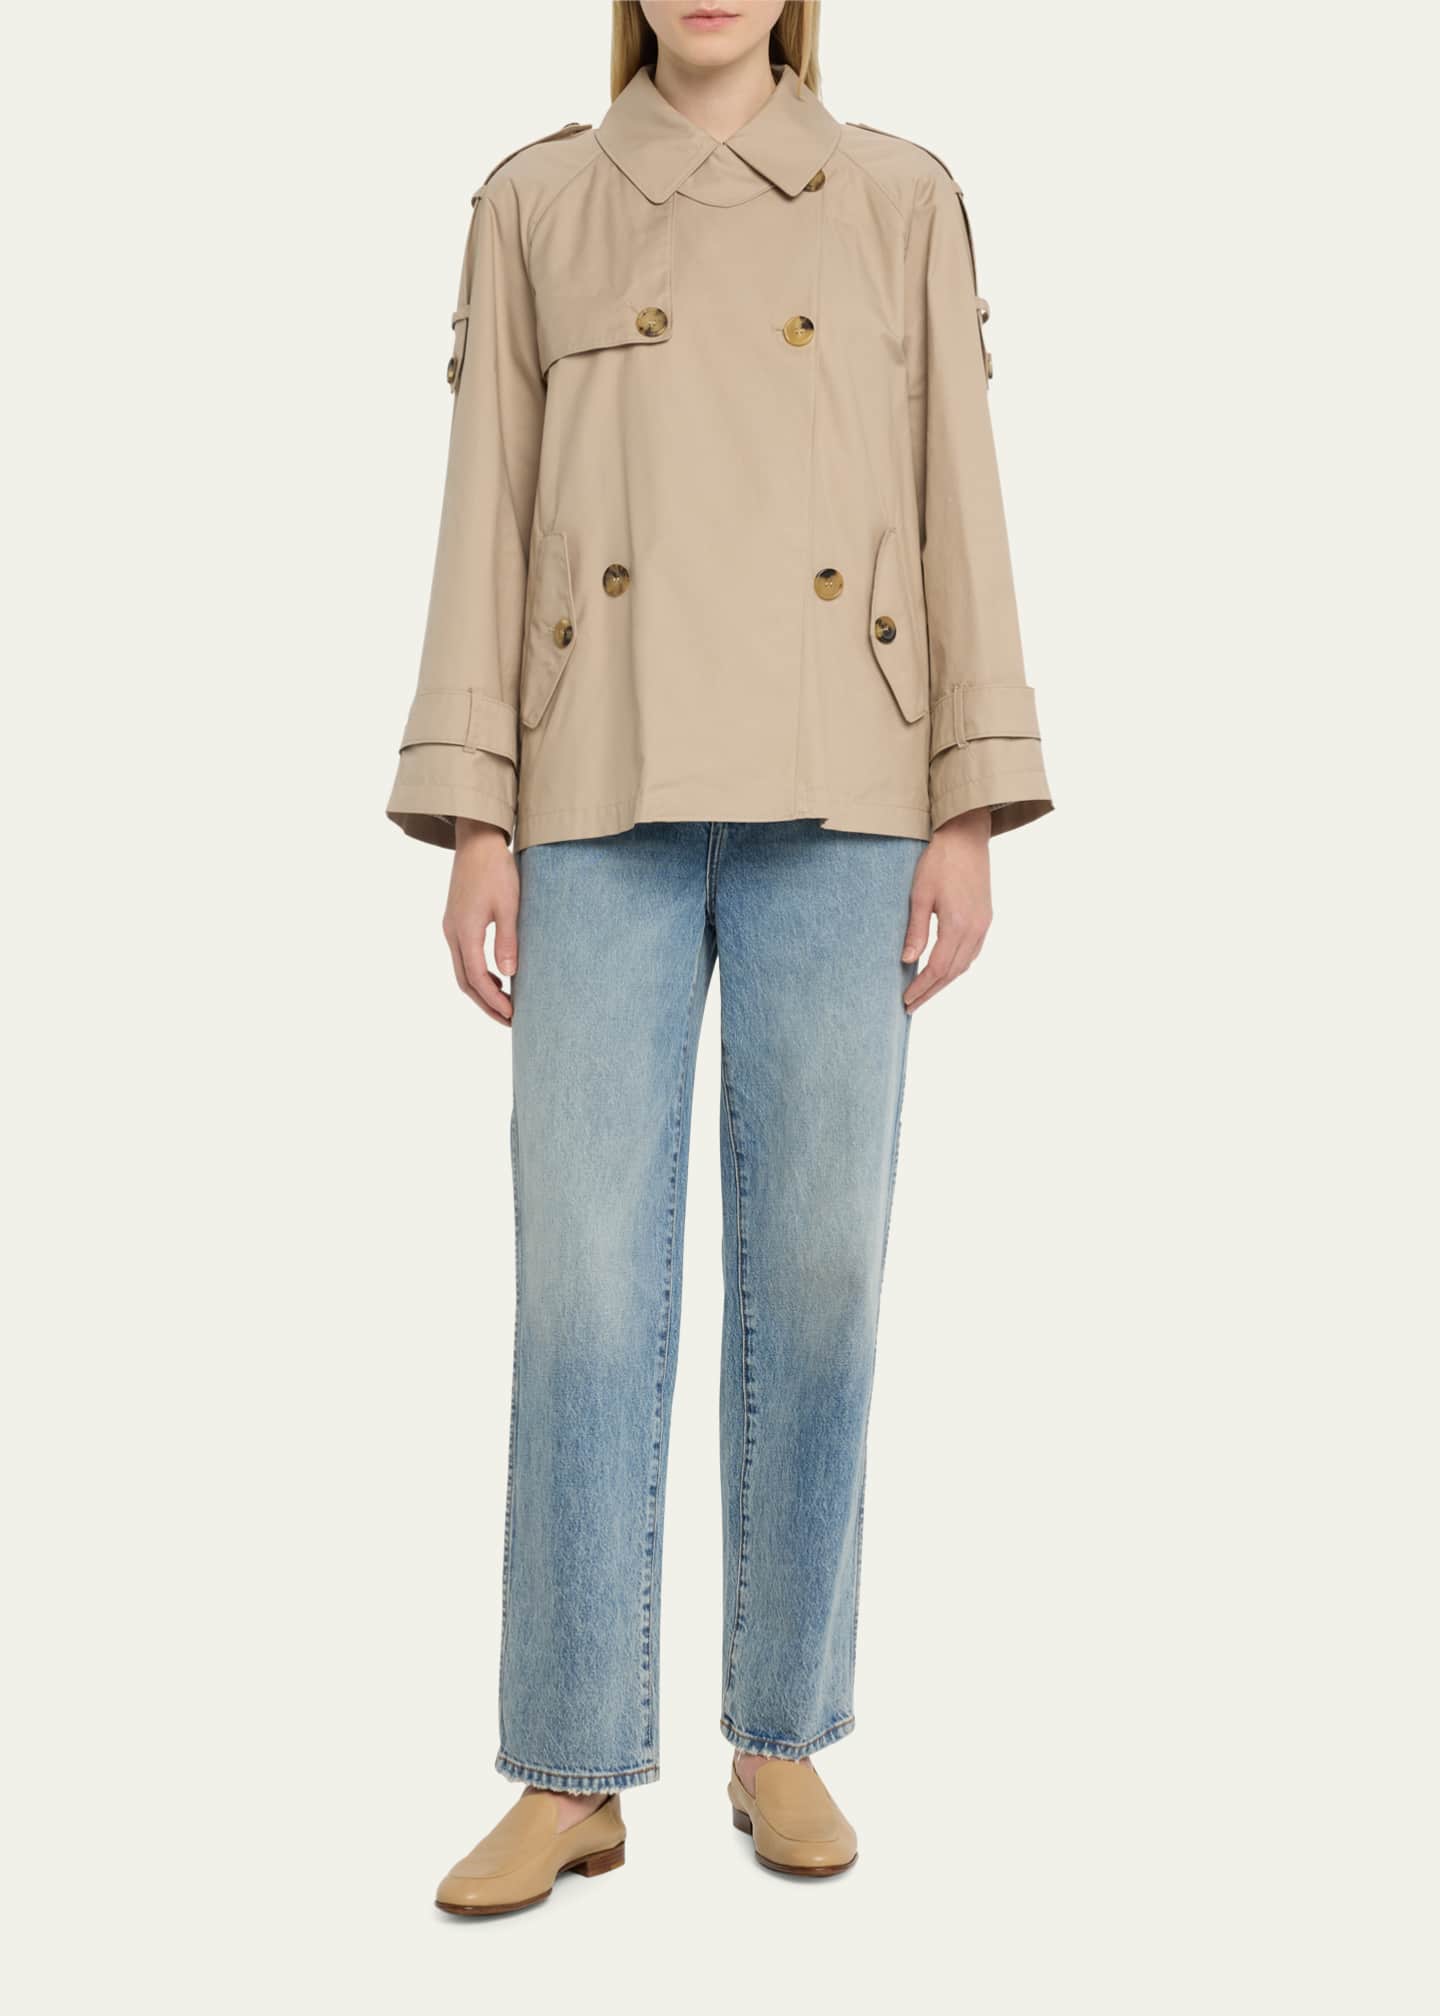 Max Mara Dtrench Double-Breasted Water-Resistant Coat - Bergdorf Goodman